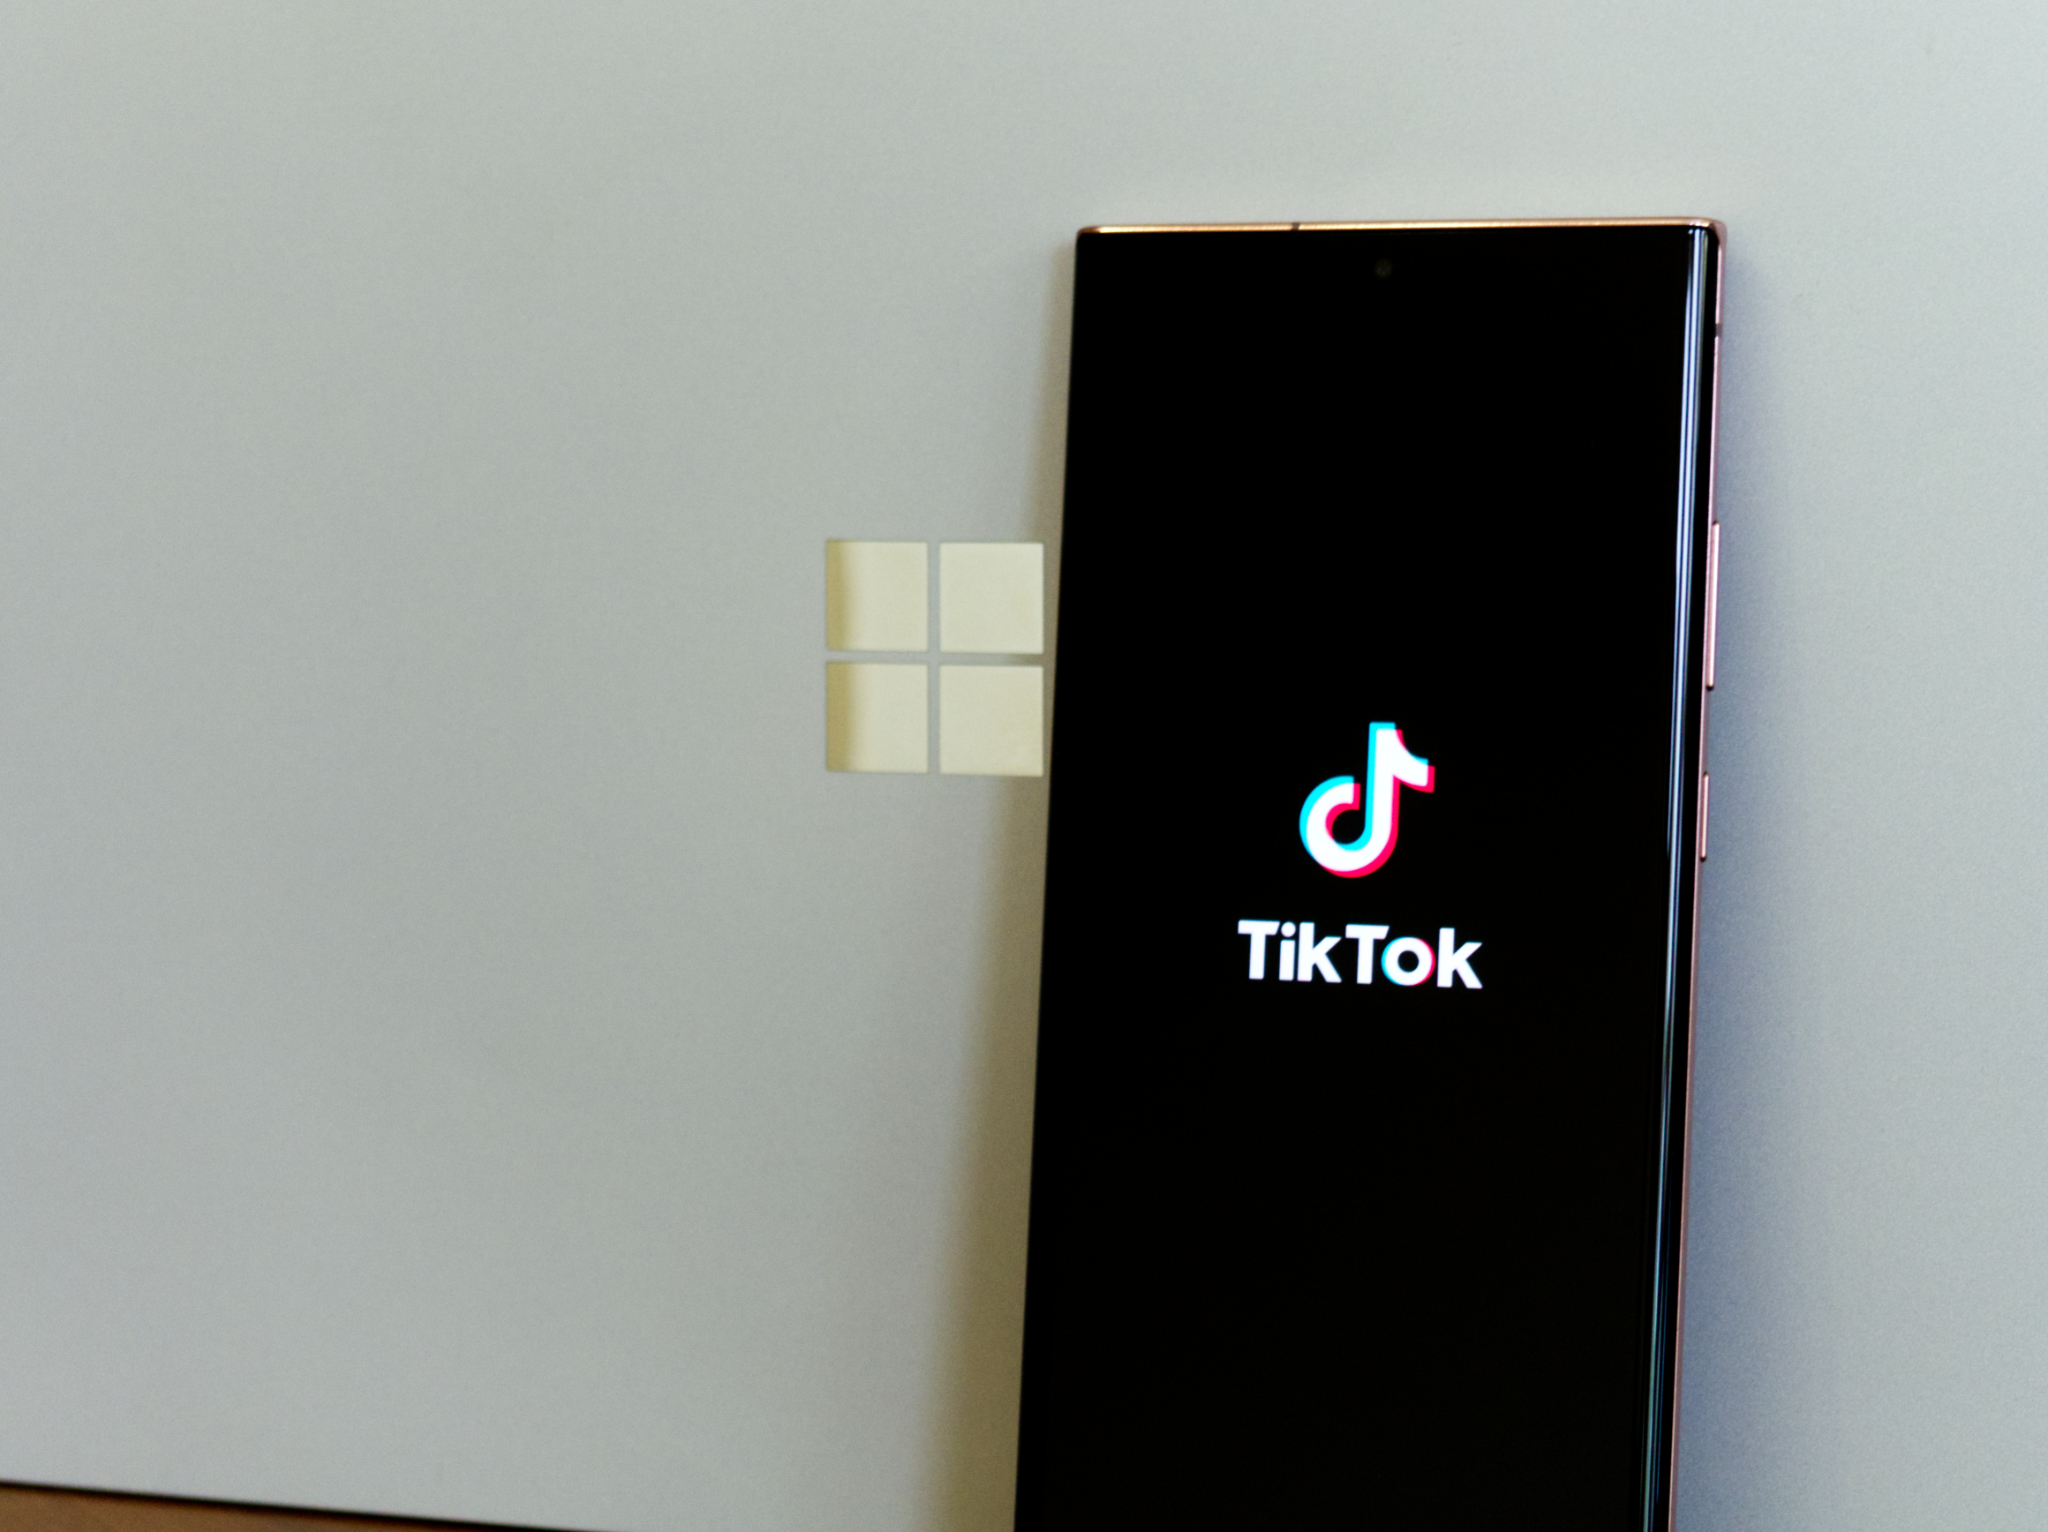 Pakistan has now banned TikTok for ‘immoral’ and ‘indecent’ content material